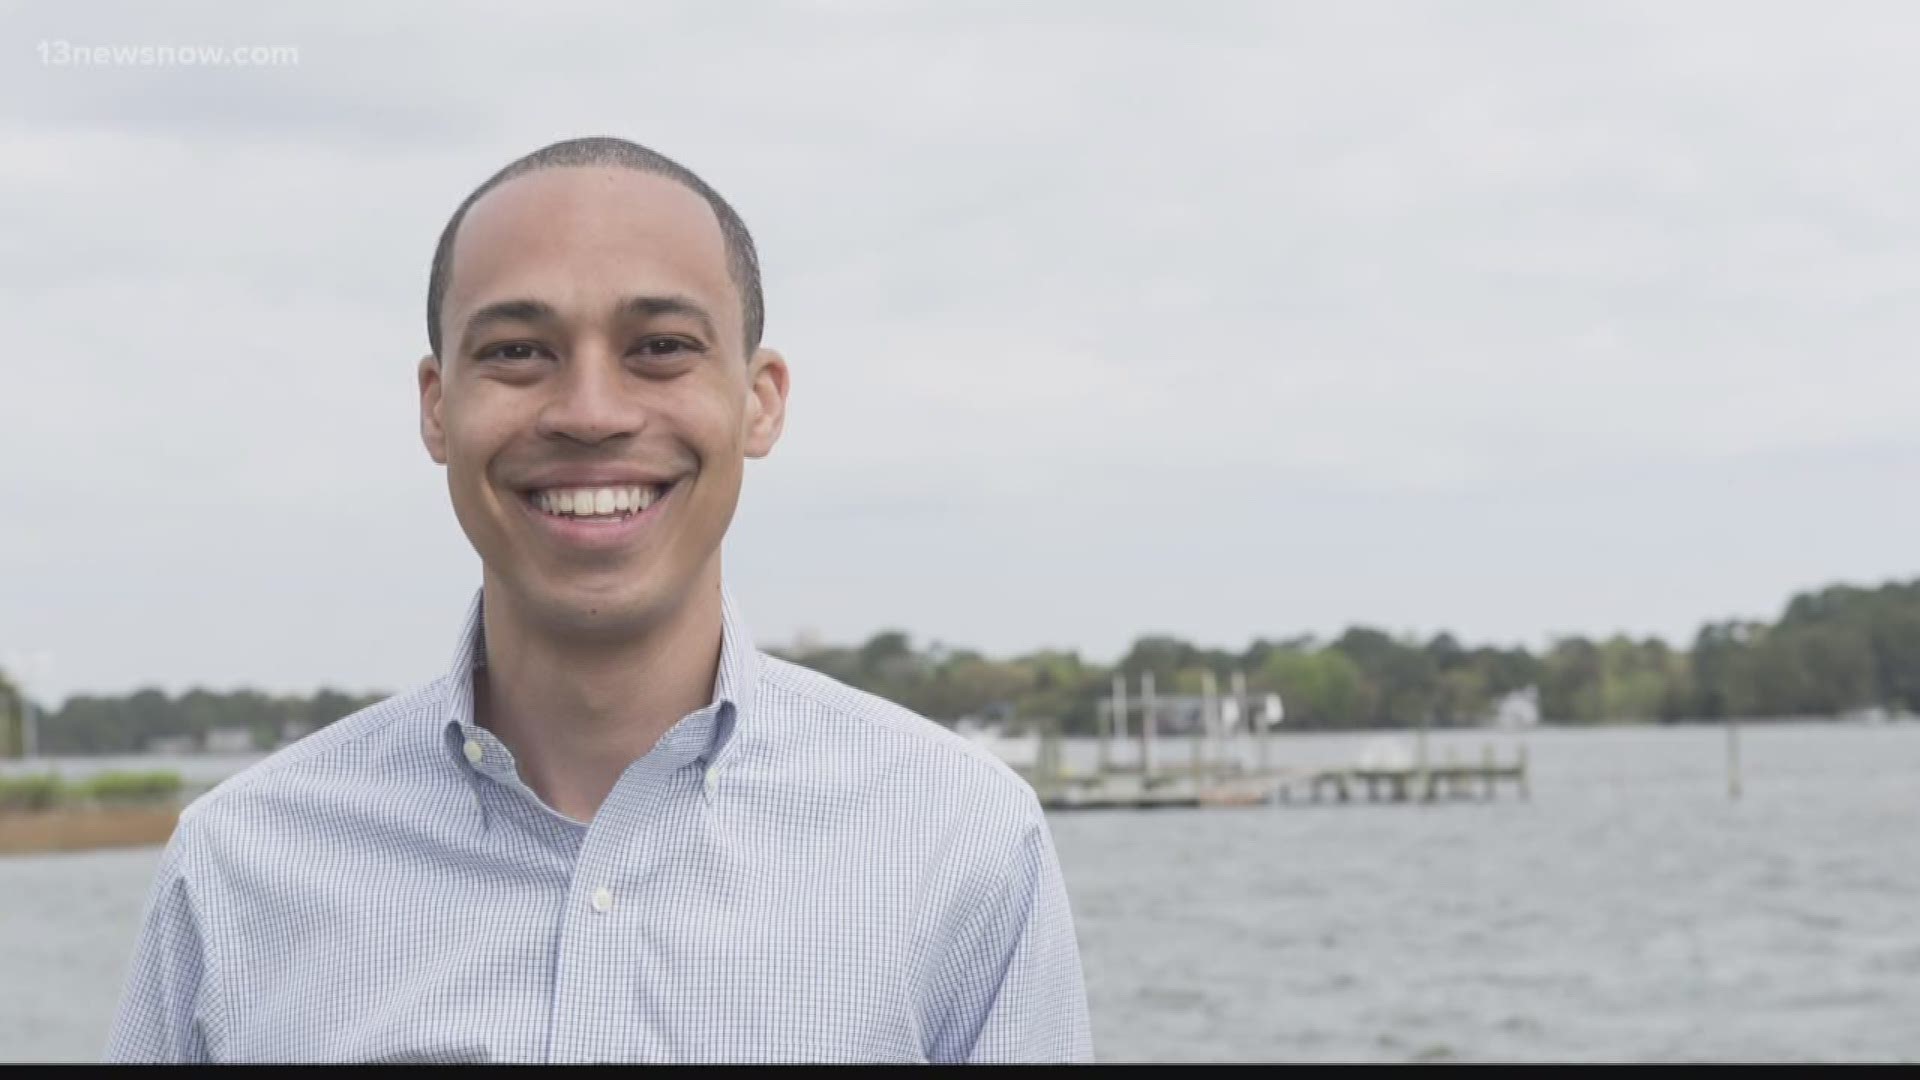 At just 28-years old, Jay Jones went to Richmond in January as the youngest member of the General Assembly.